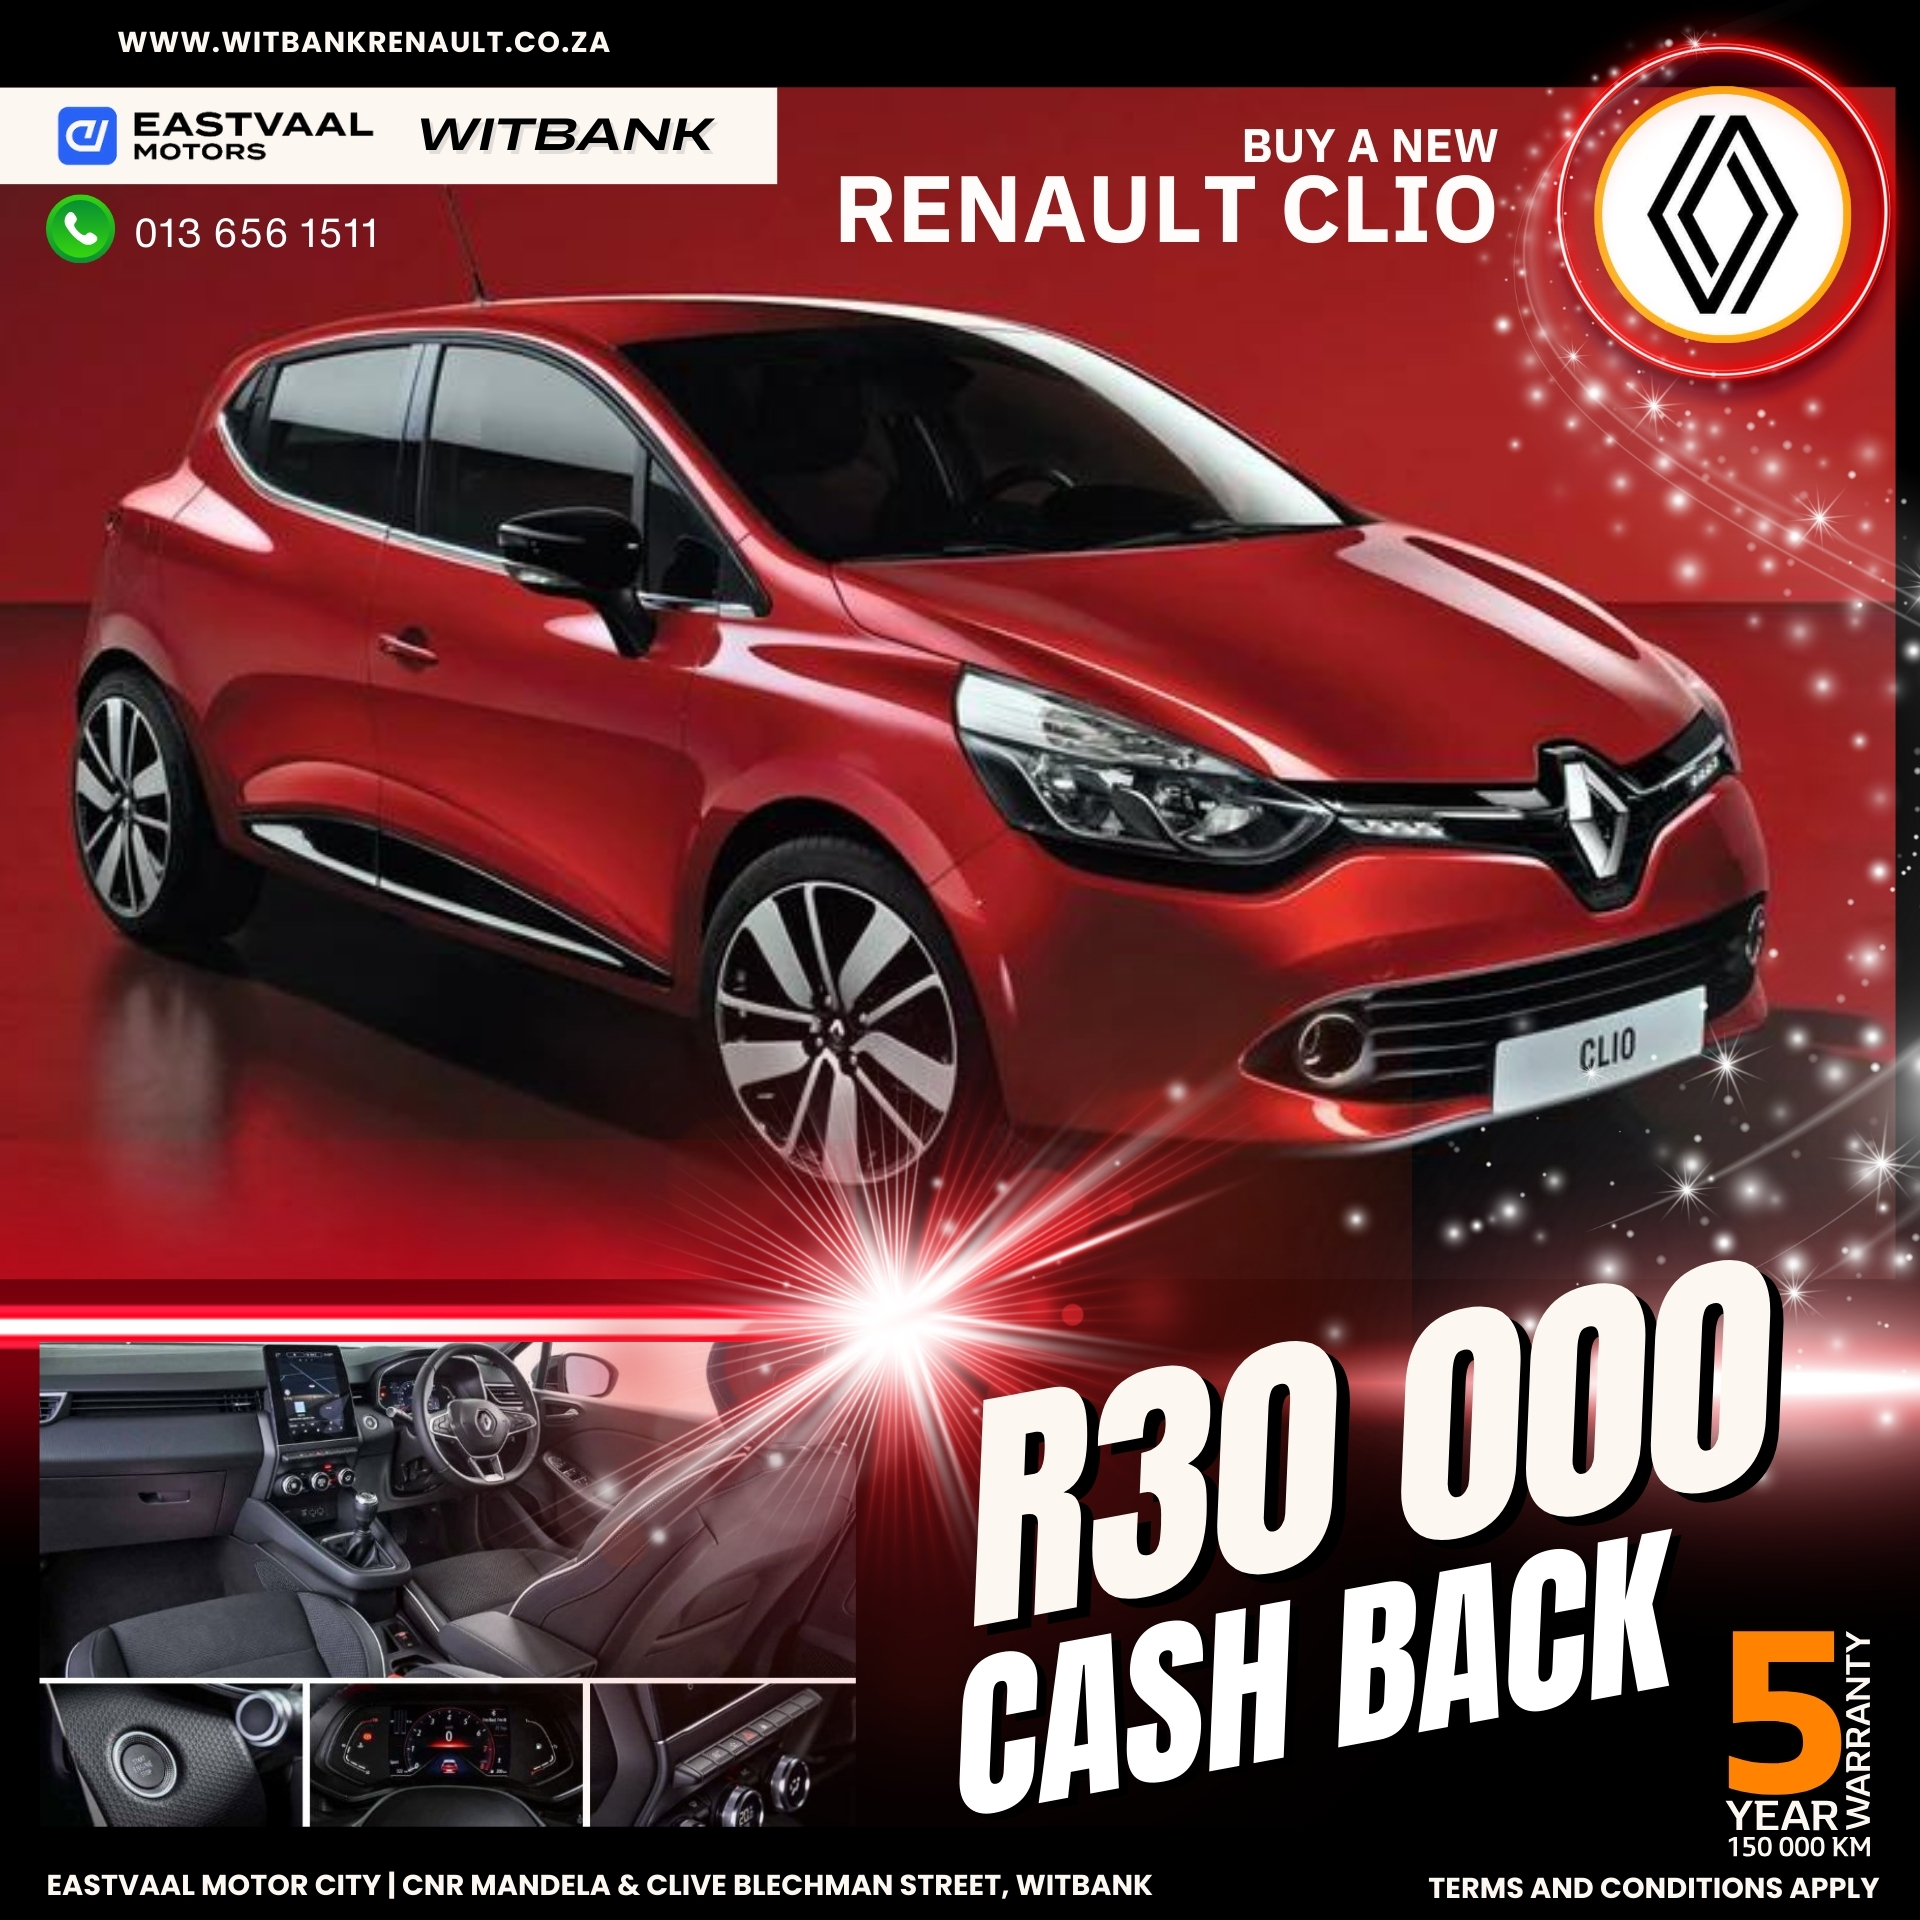 Renault Clio image from 